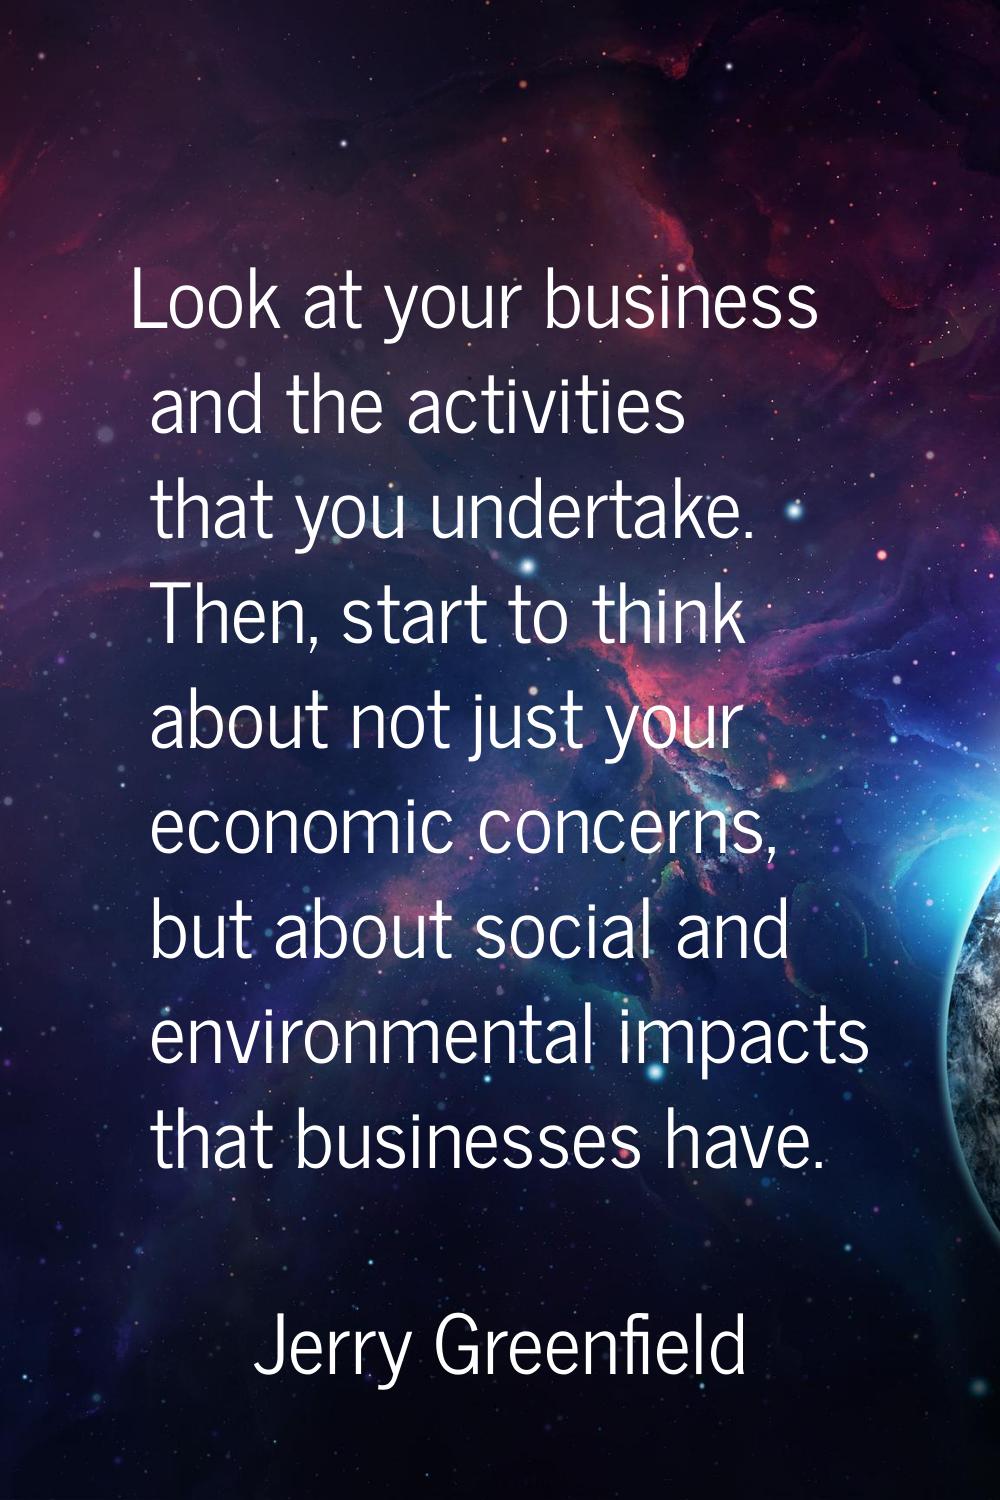 Look at your business and the activities that you undertake. Then, start to think about not just yo